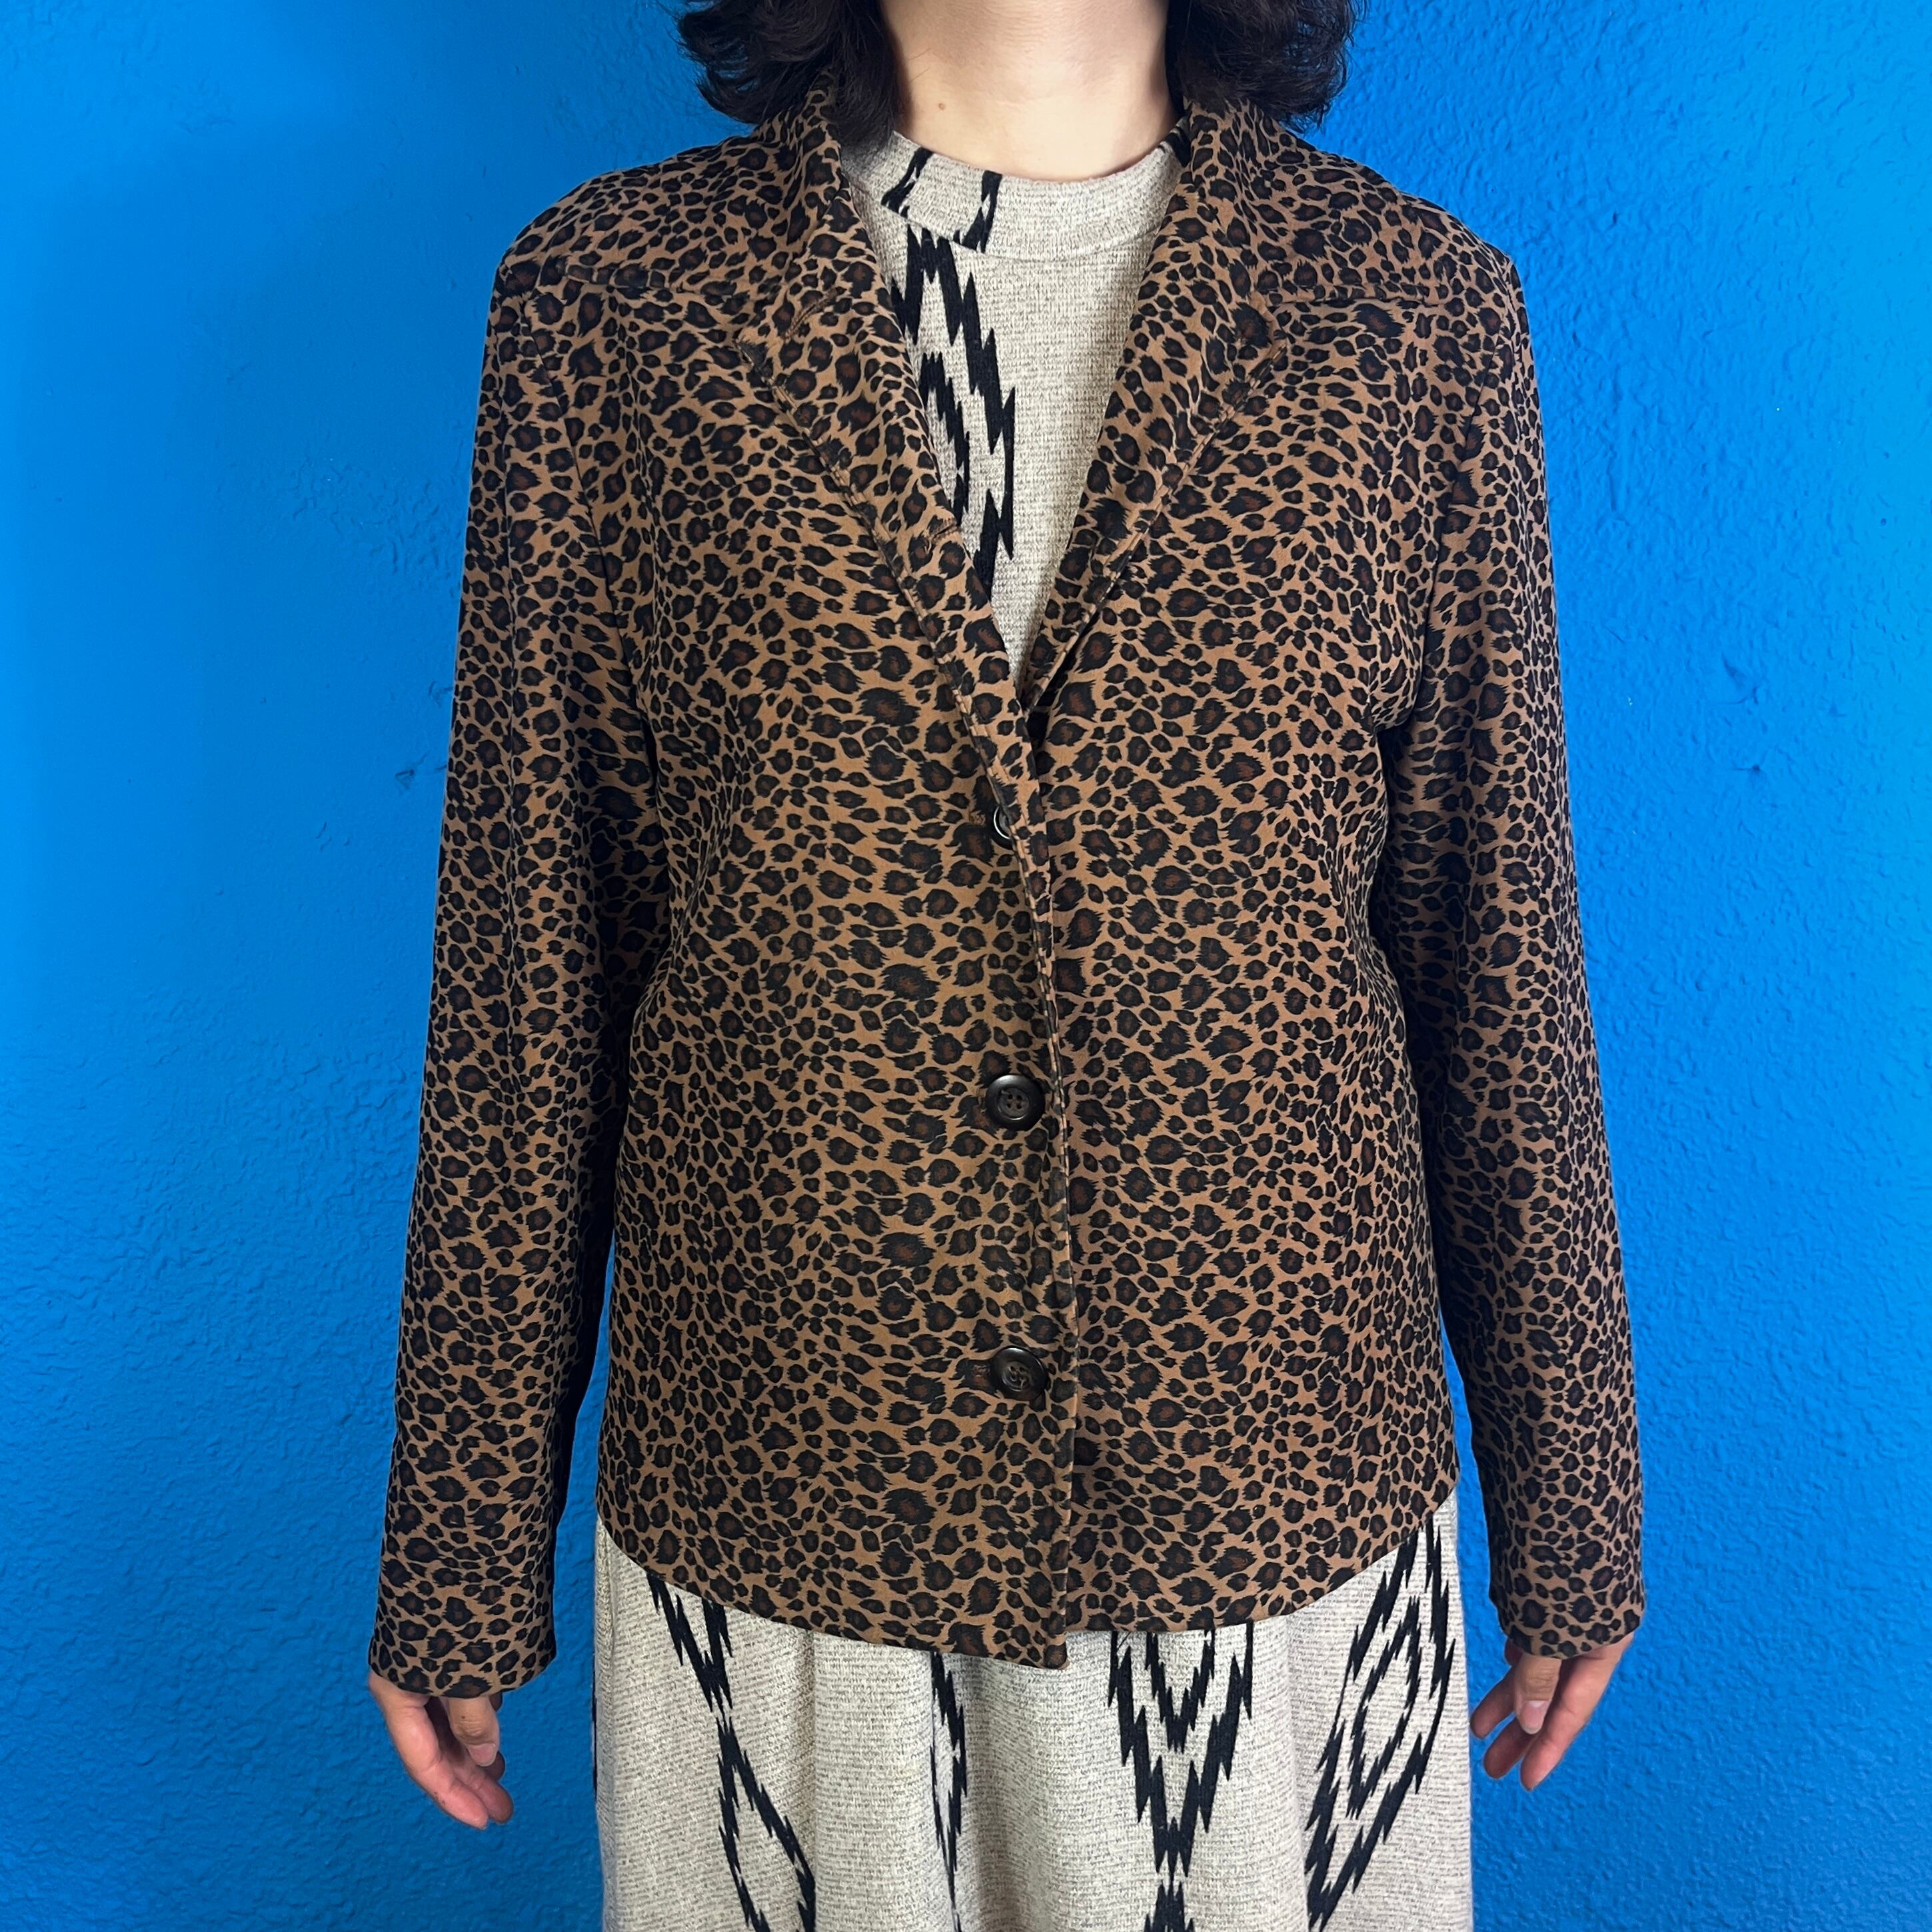 【Lady's】 90s Leopard Print Jacket / Made In USA レオパード